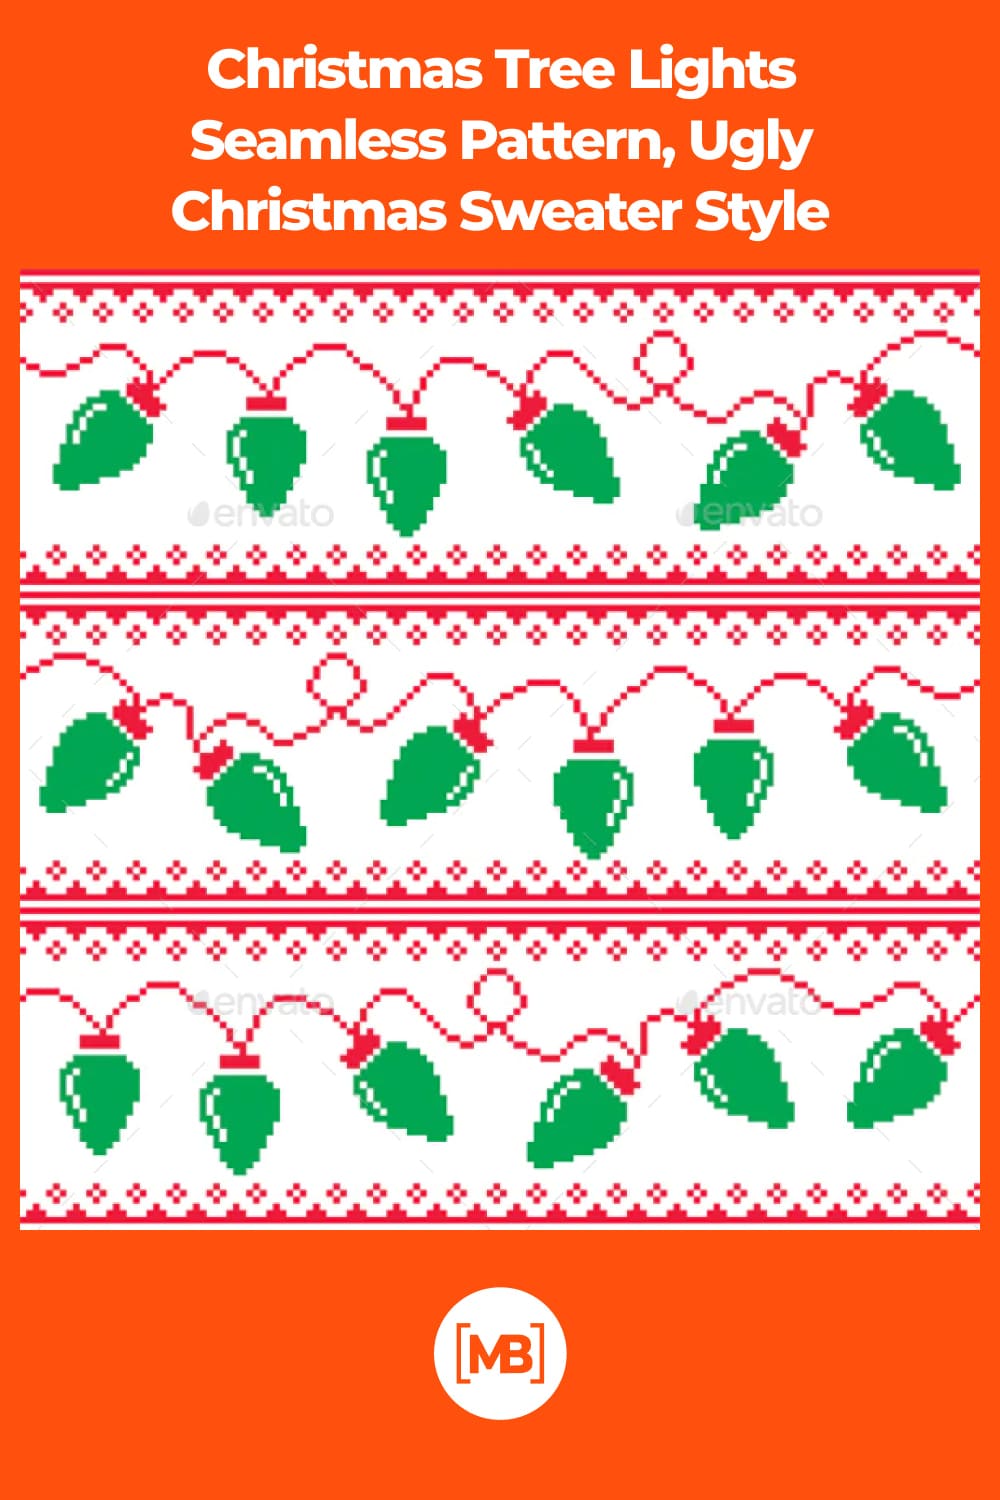 Embroidered green garland with red wires that echoes the traditional color scheme of Christmas.